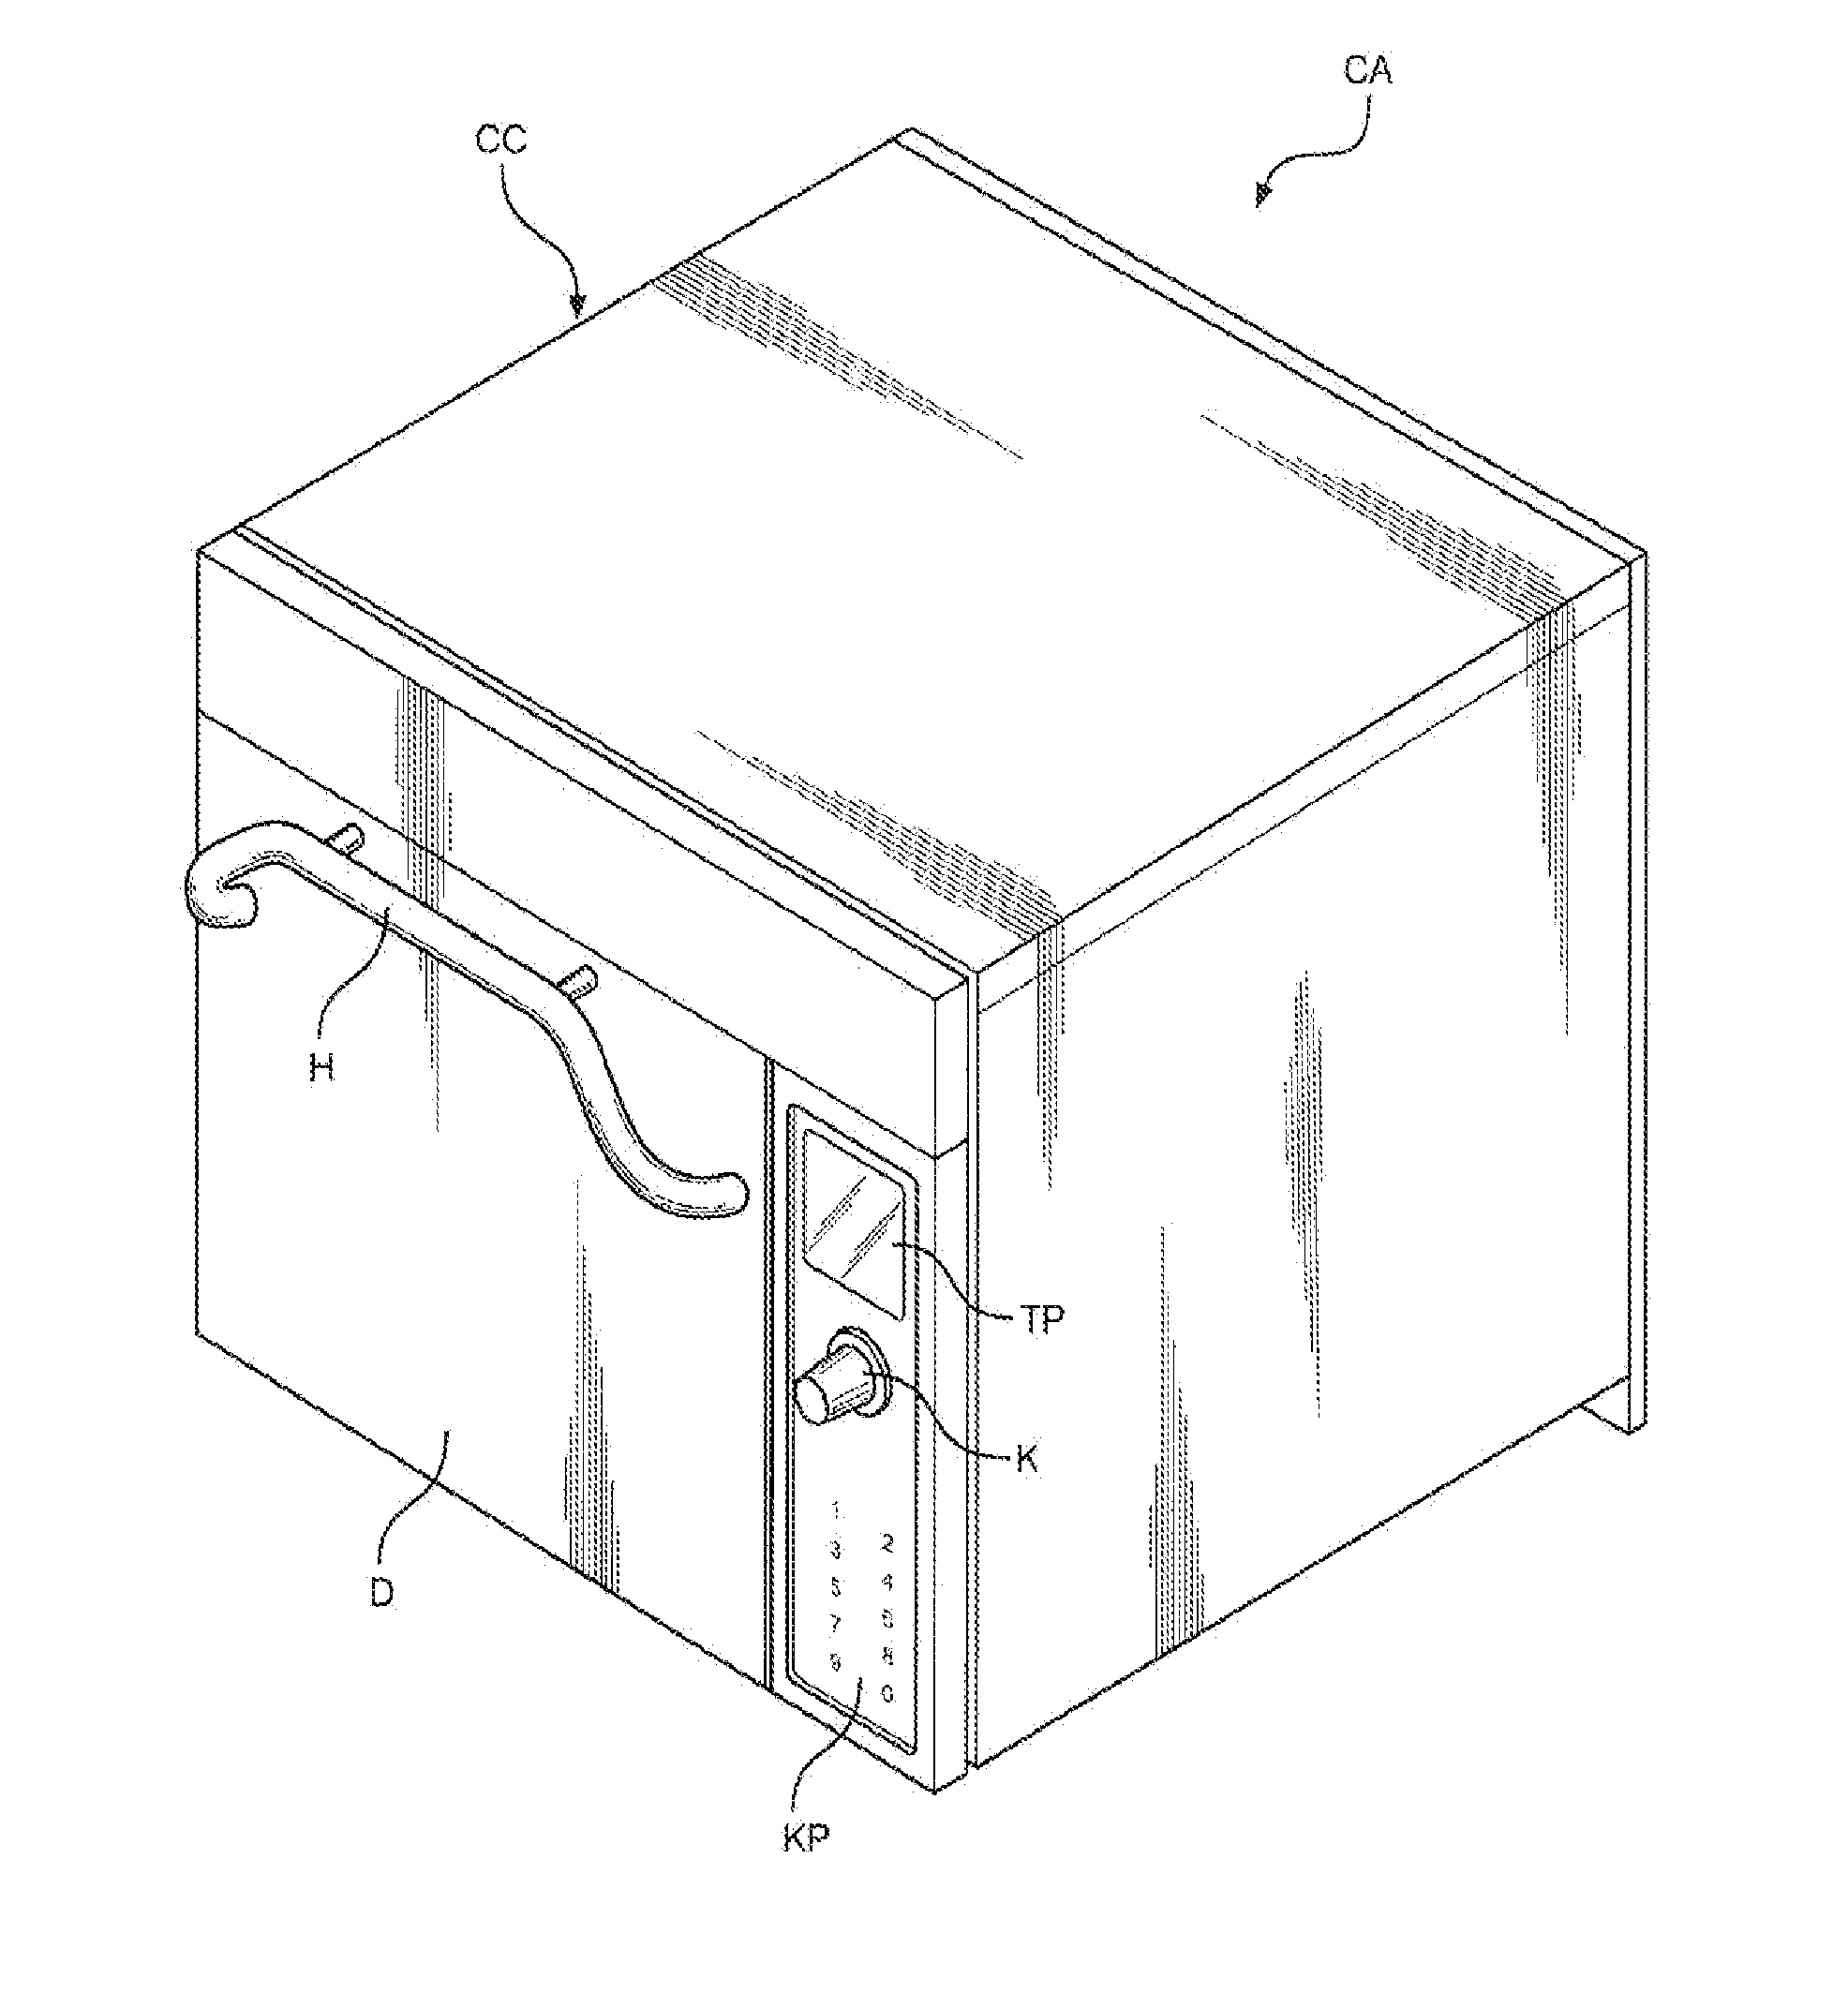 Air Circuit for Cooking Appliance Including Combination Heating System